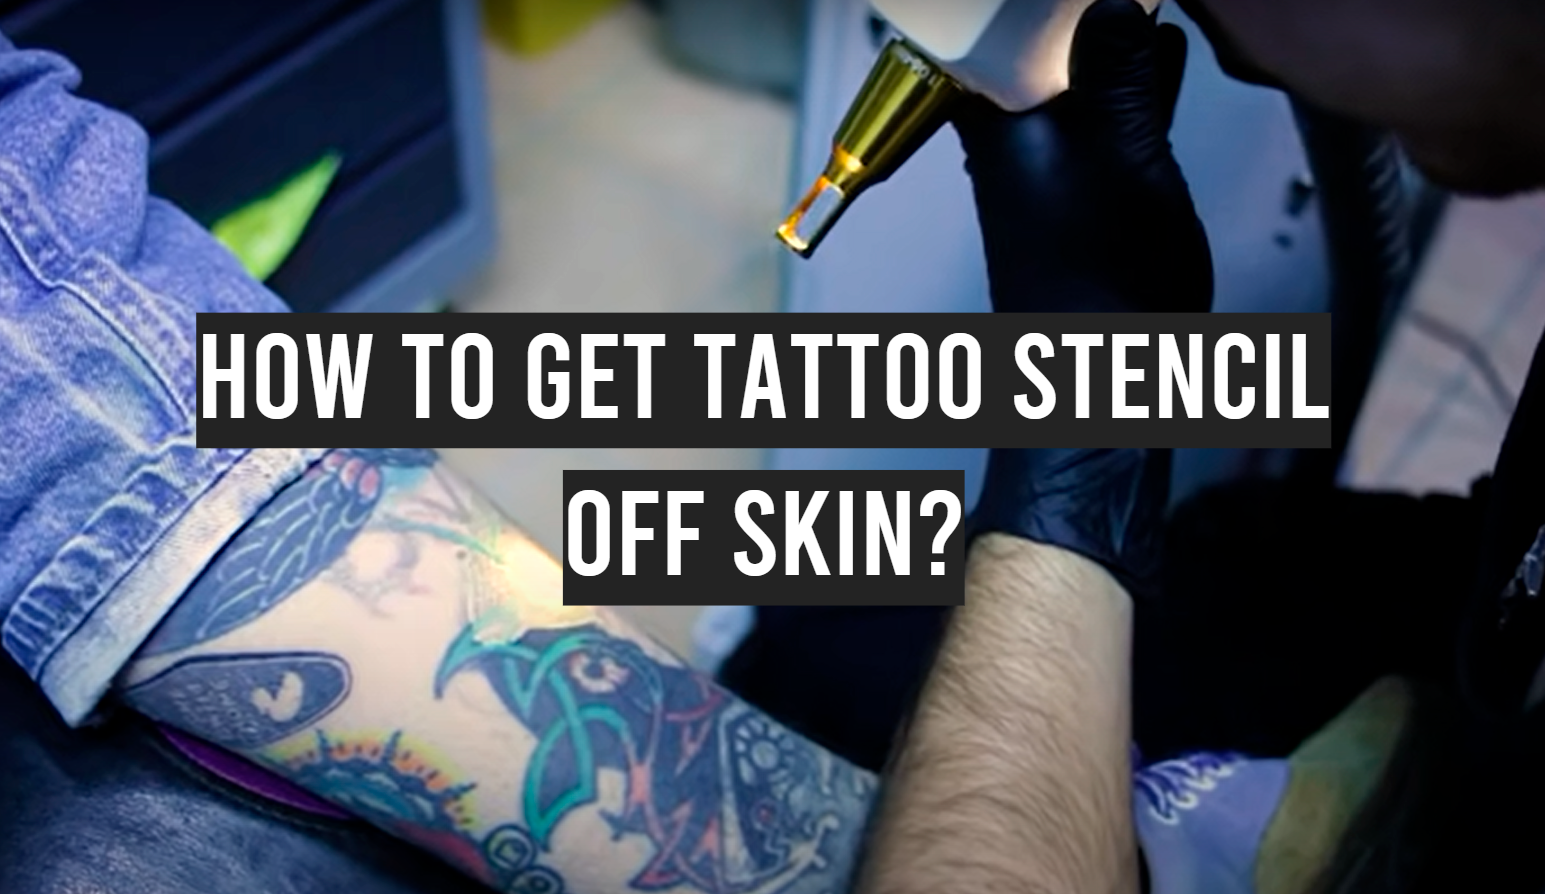 How to get tattoo stencil off